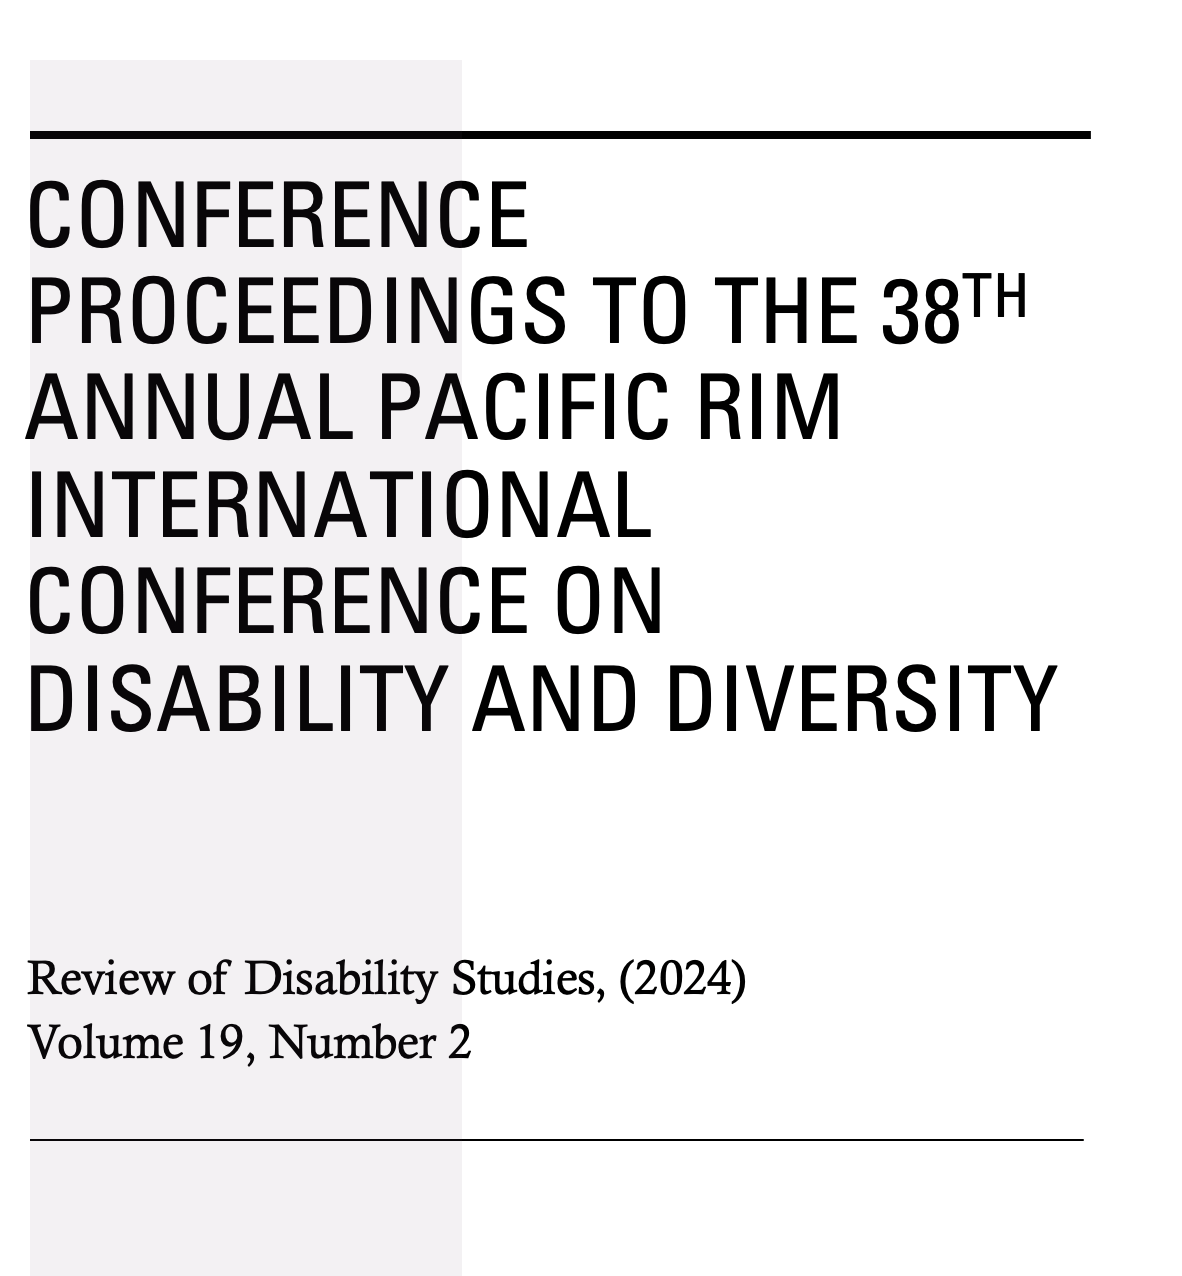 Review of Disability Studies - 39th Pac Rim Conference Proceedings cover image